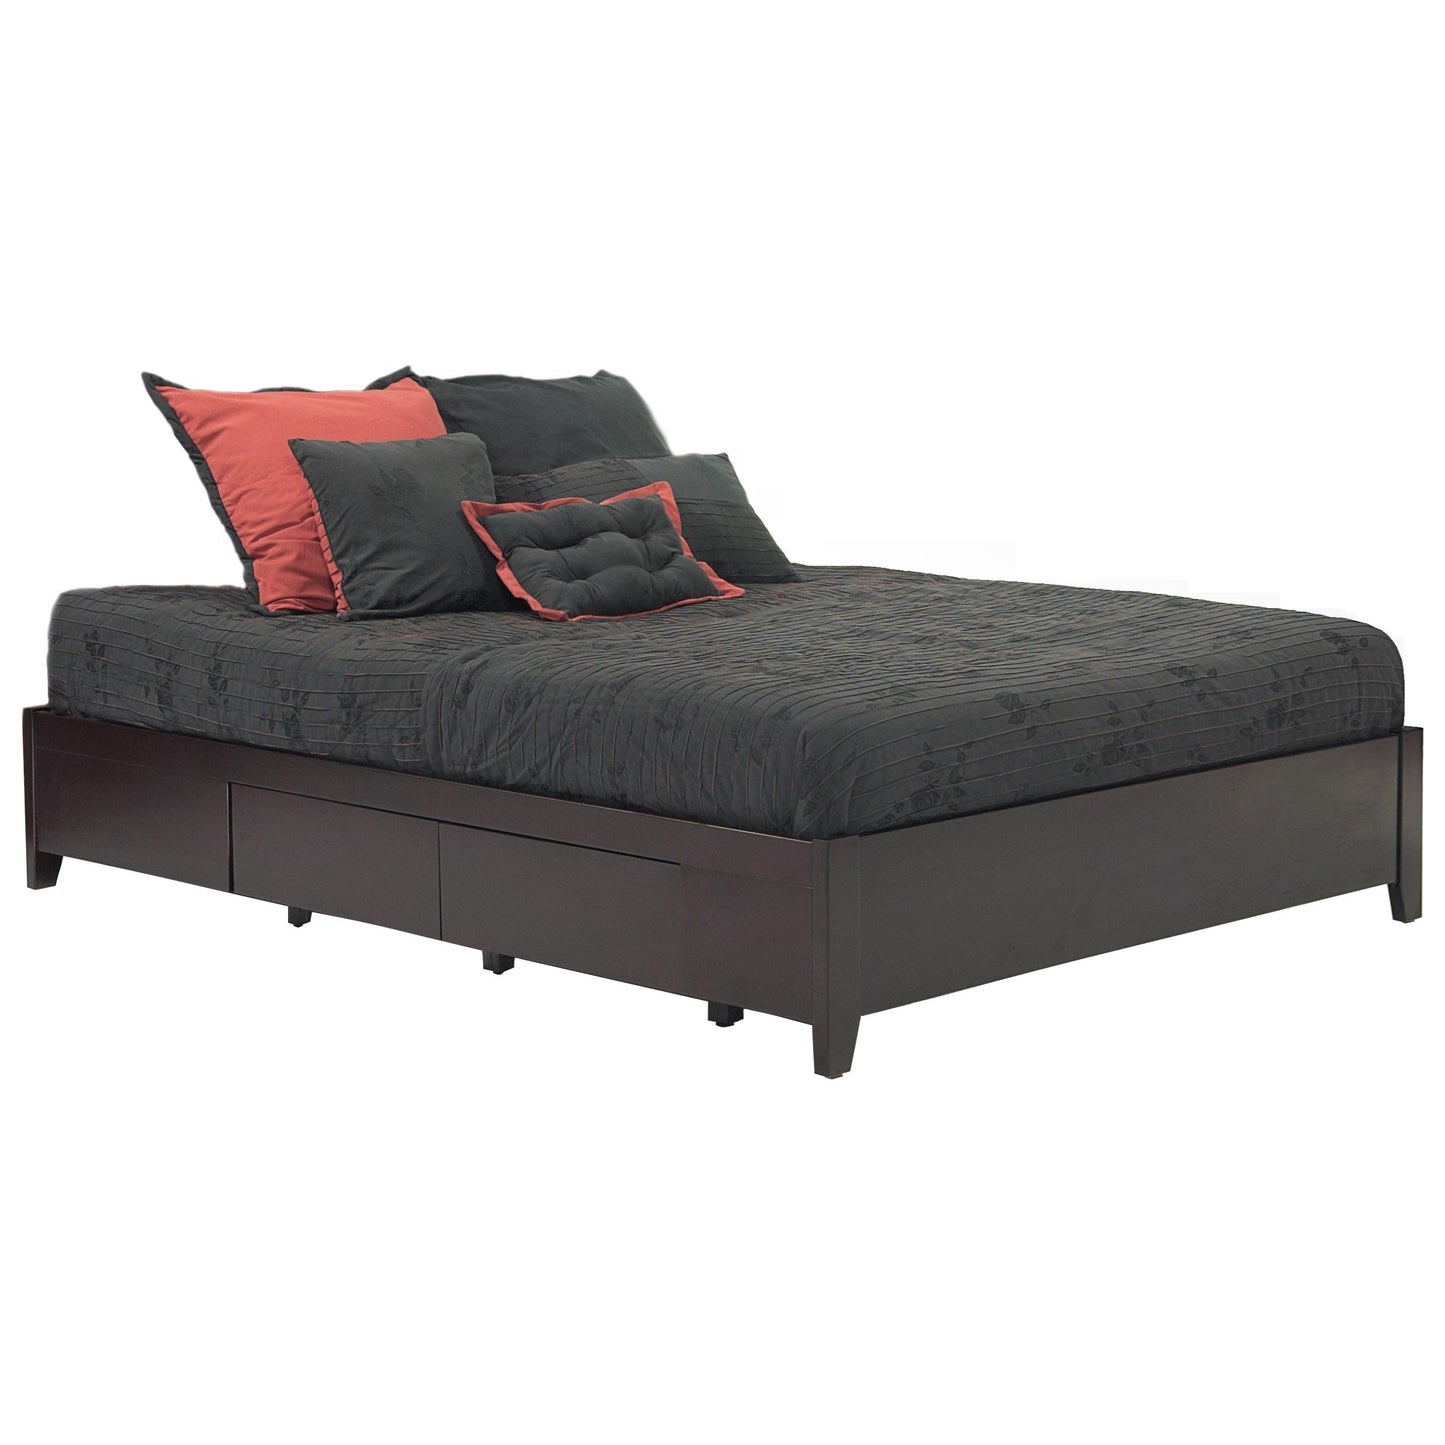 Modus Nevis Cal King Simple Storage Bed in Espresso